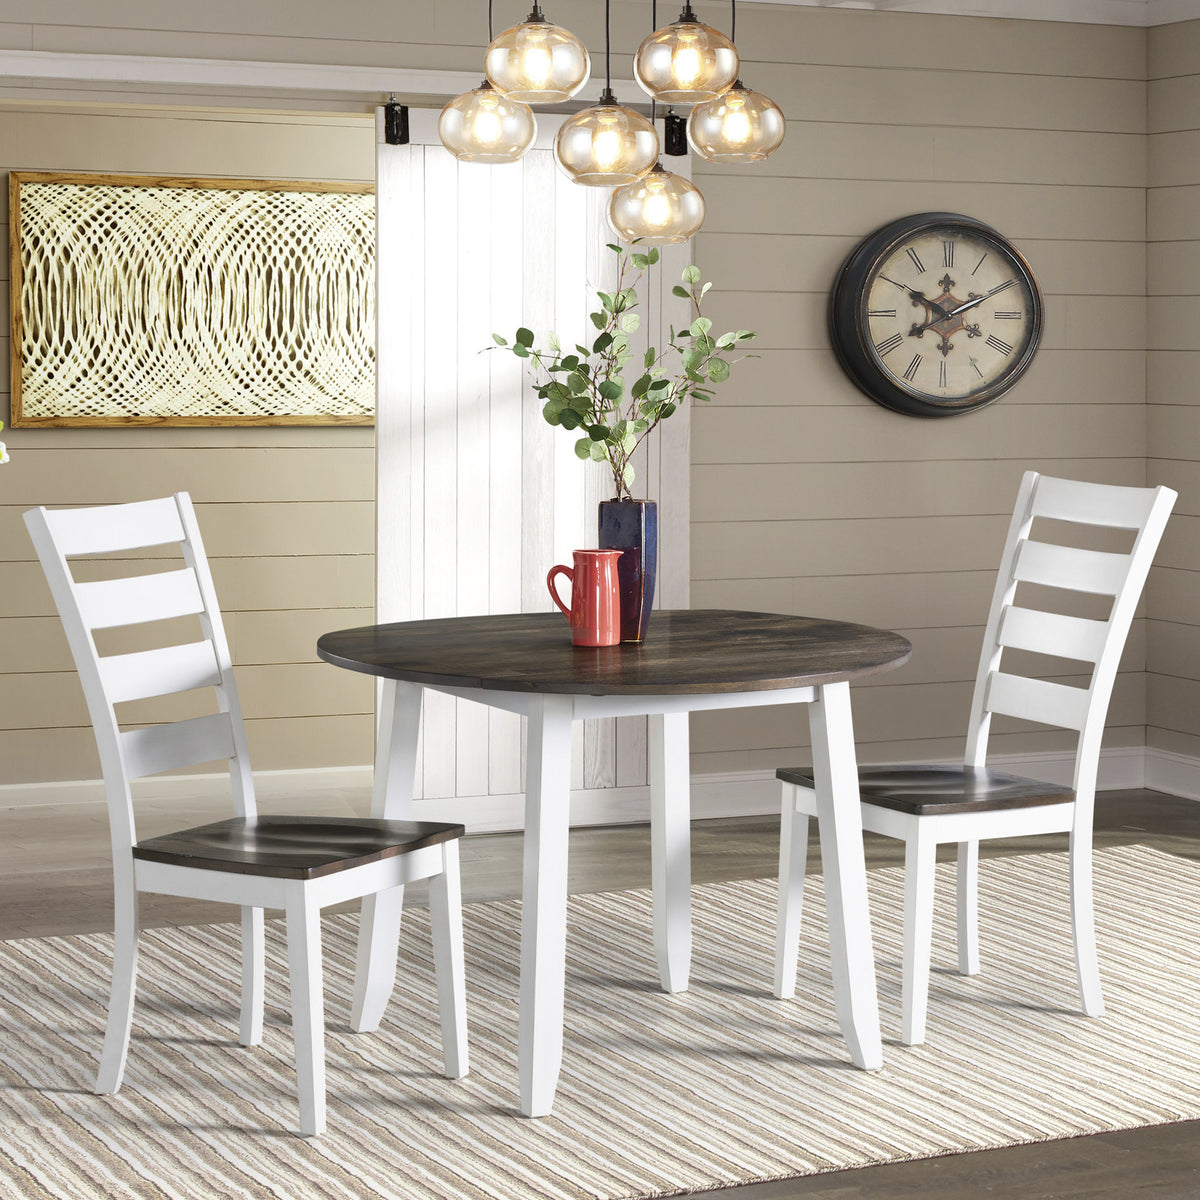 Intercon Kona Drop Leaf Dining Table in Grey and White